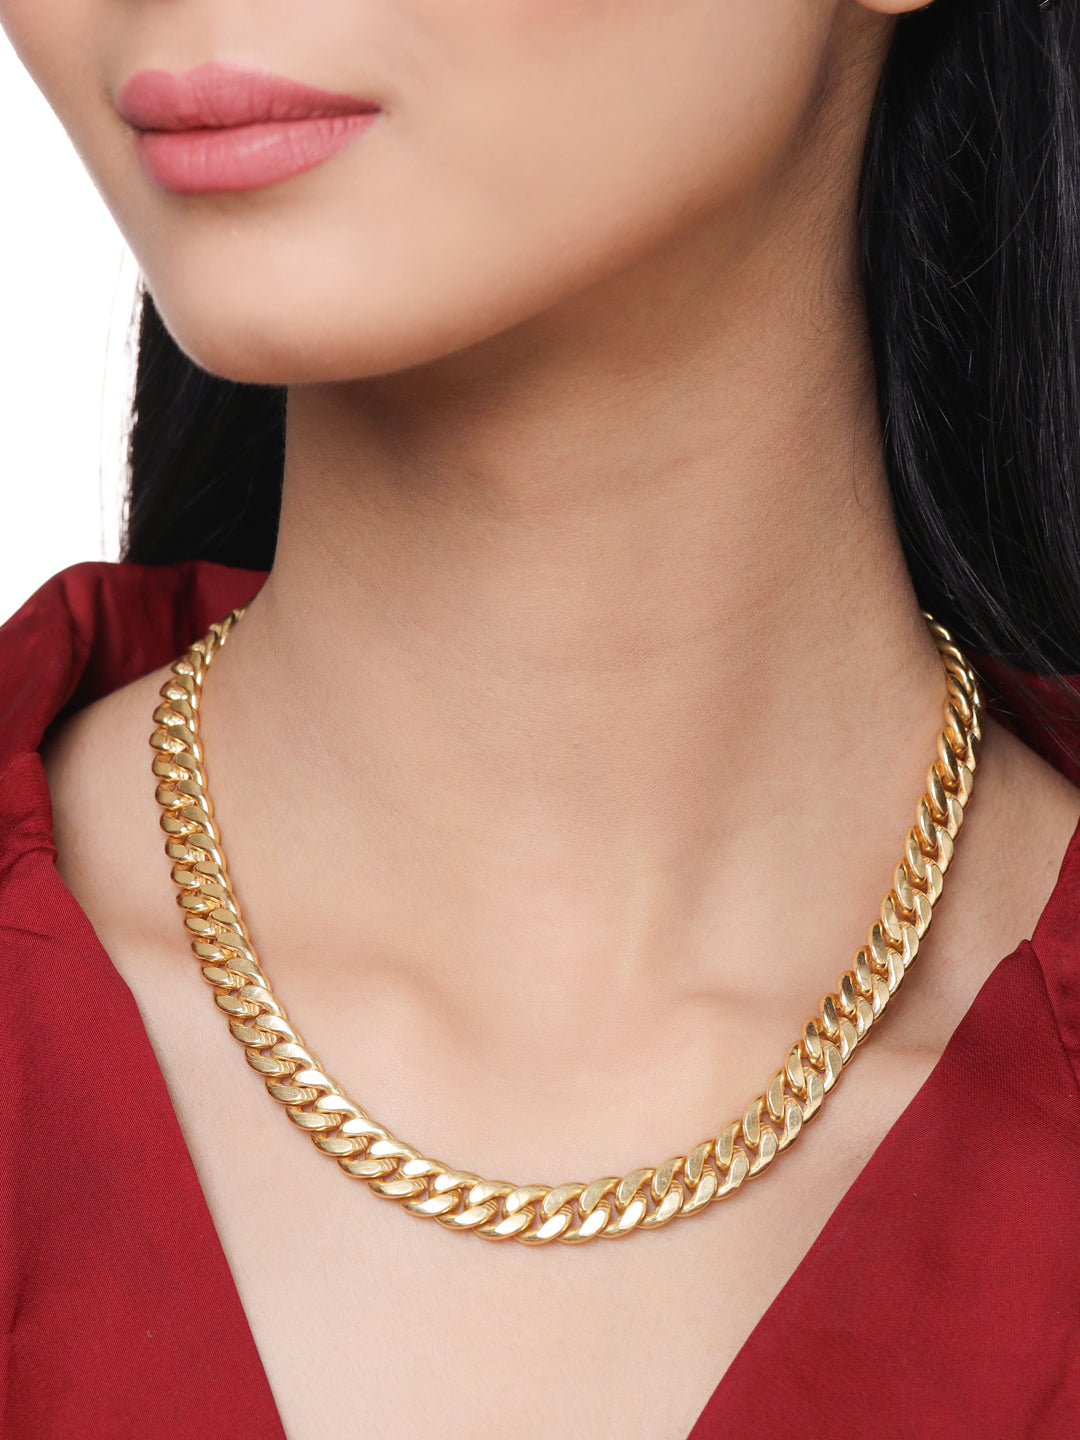 Dolly Singh - Curb Chain Necklace